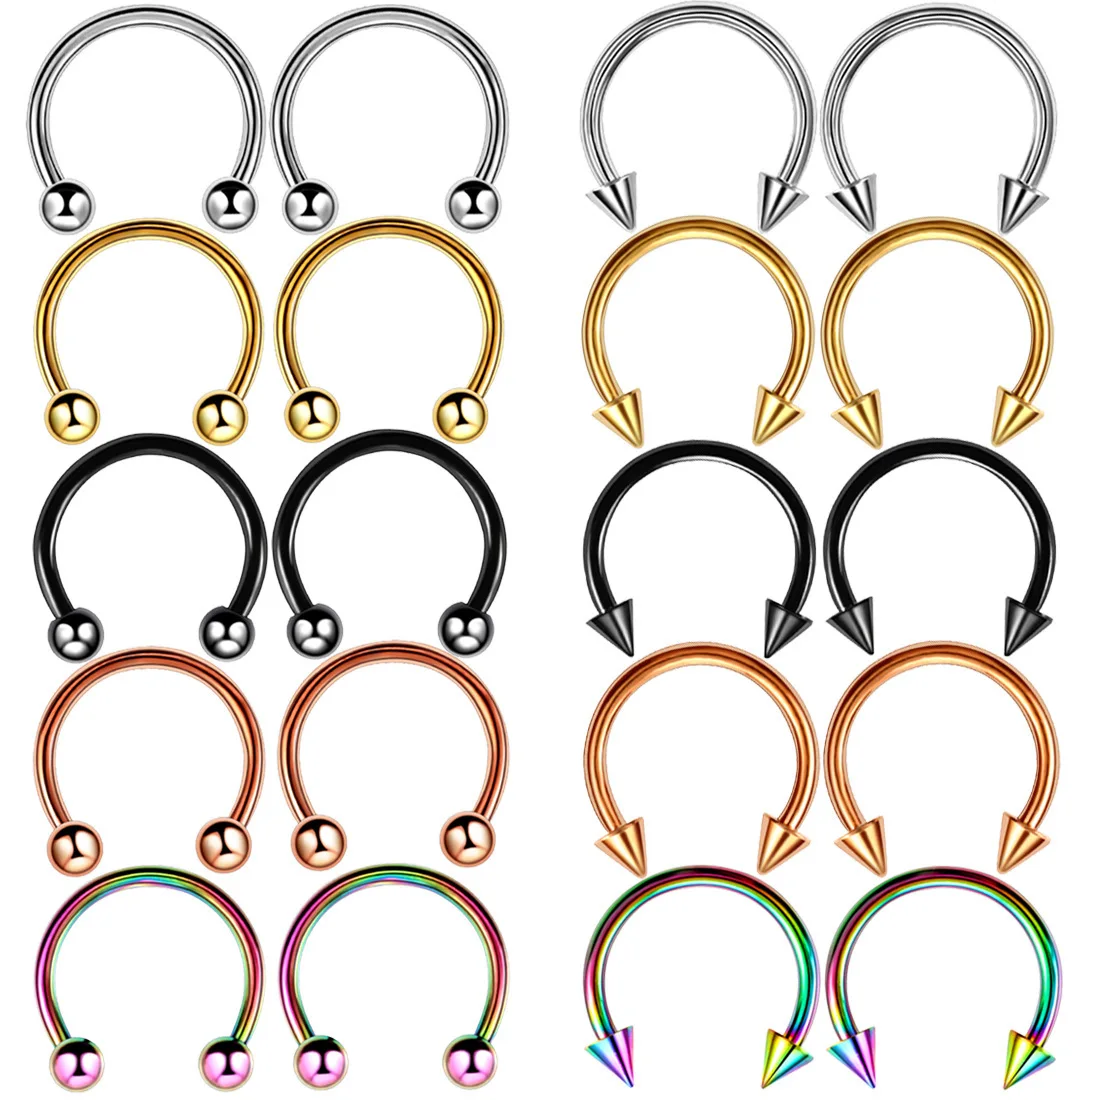 

Hot Sale Nostril Piercing Jewelry Faux Septum C Shape Hoop Ring Non Piercing Stainless Steel Silver Black Gold Nose Ring